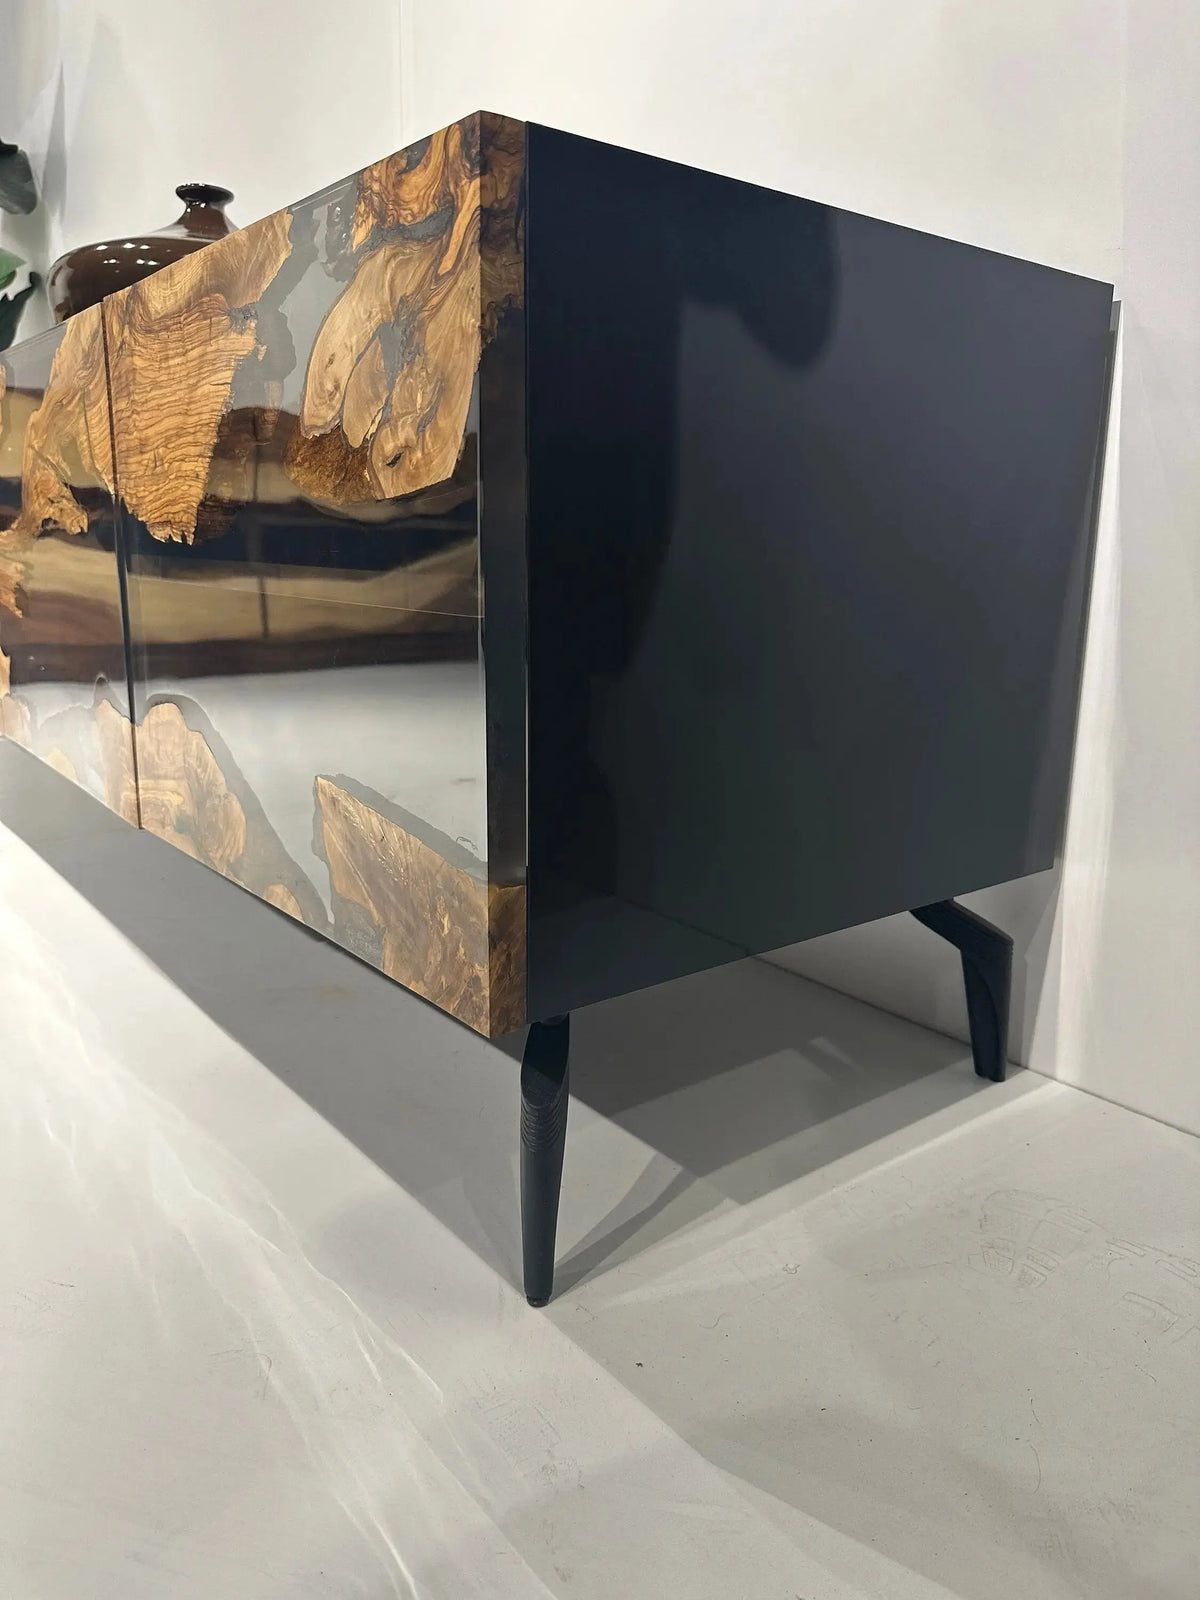 Olive Wood Resin Media Center | Wooden Media Console | Tv Stand